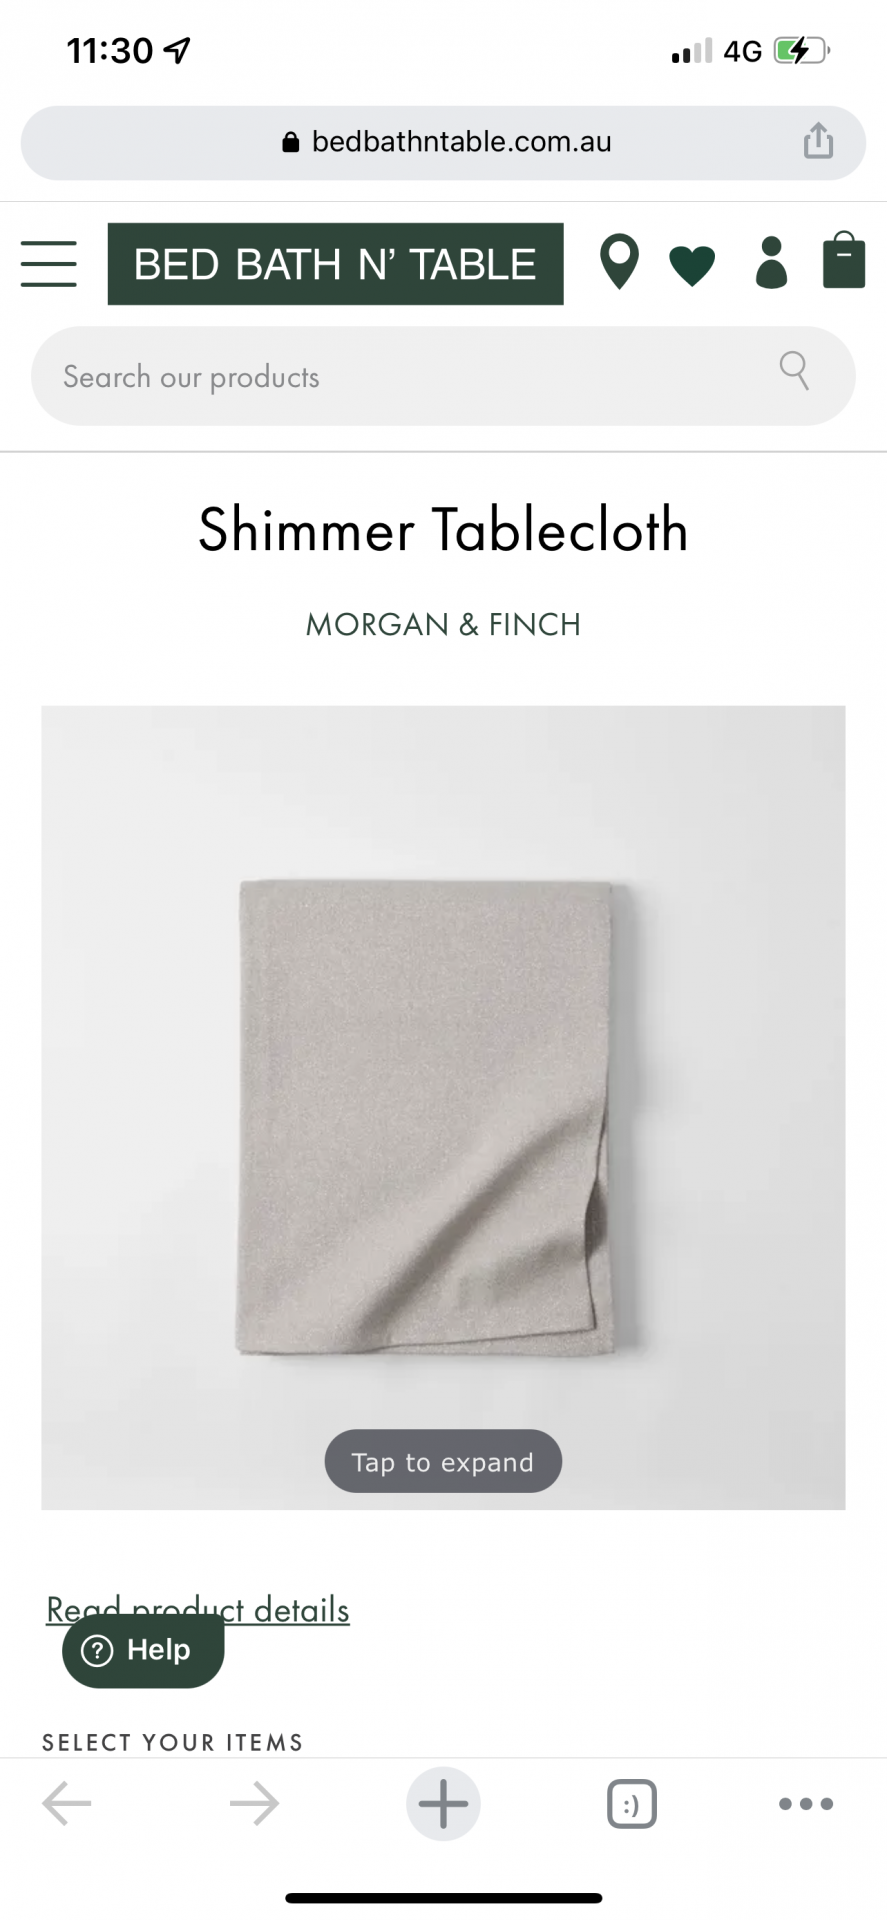 Shimmer Tablecloth